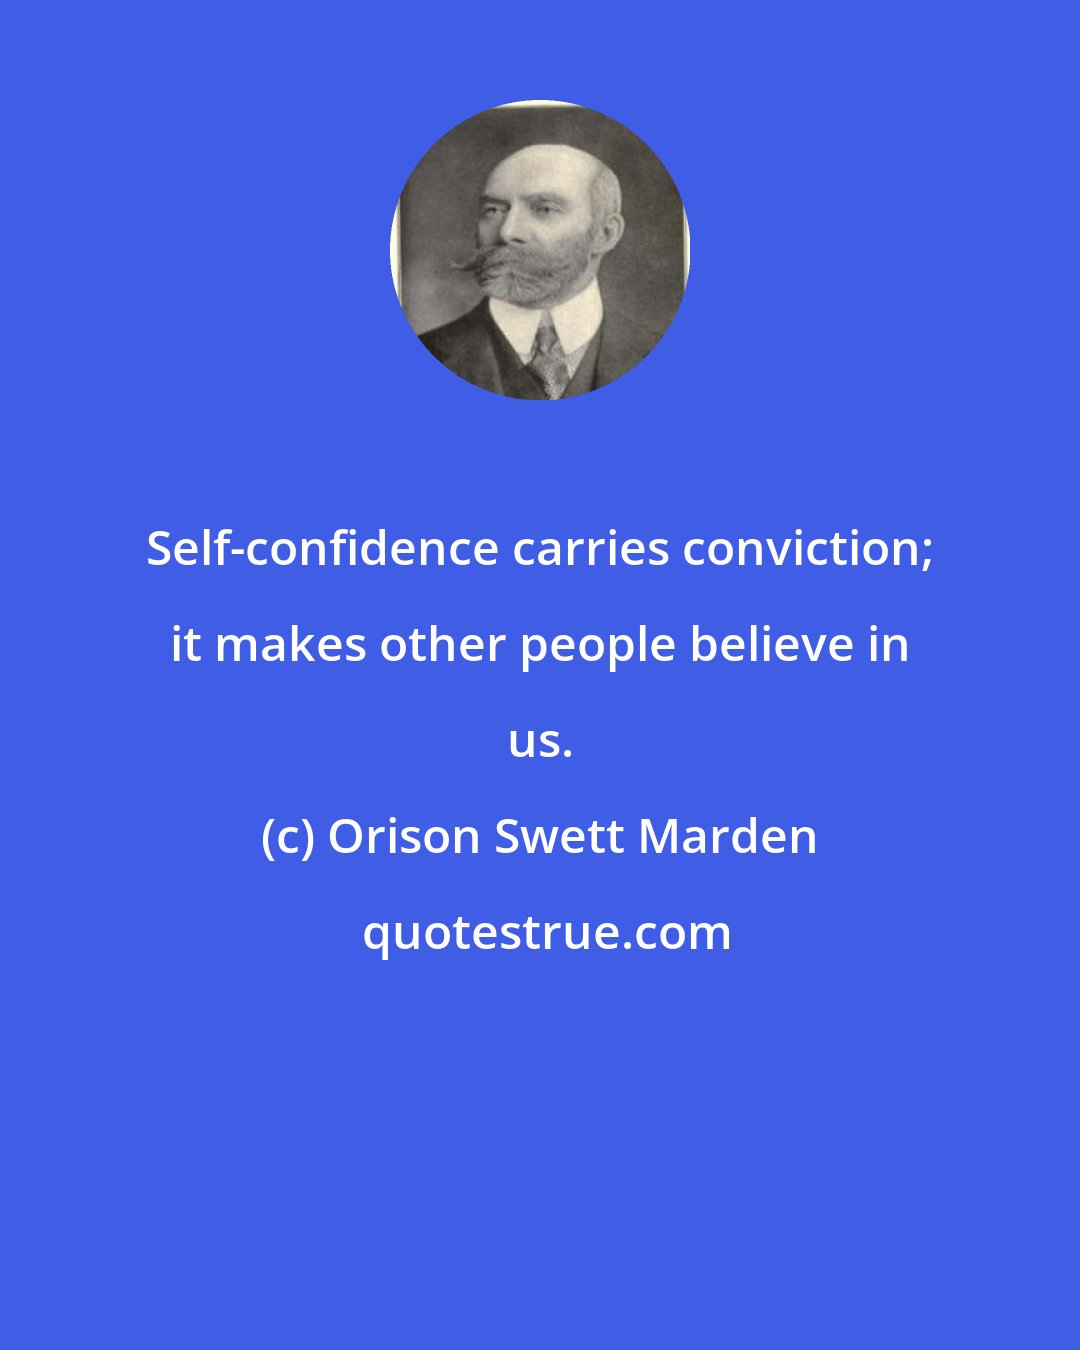 Orison Swett Marden: Self-confidence carries conviction; it makes other people believe in us.